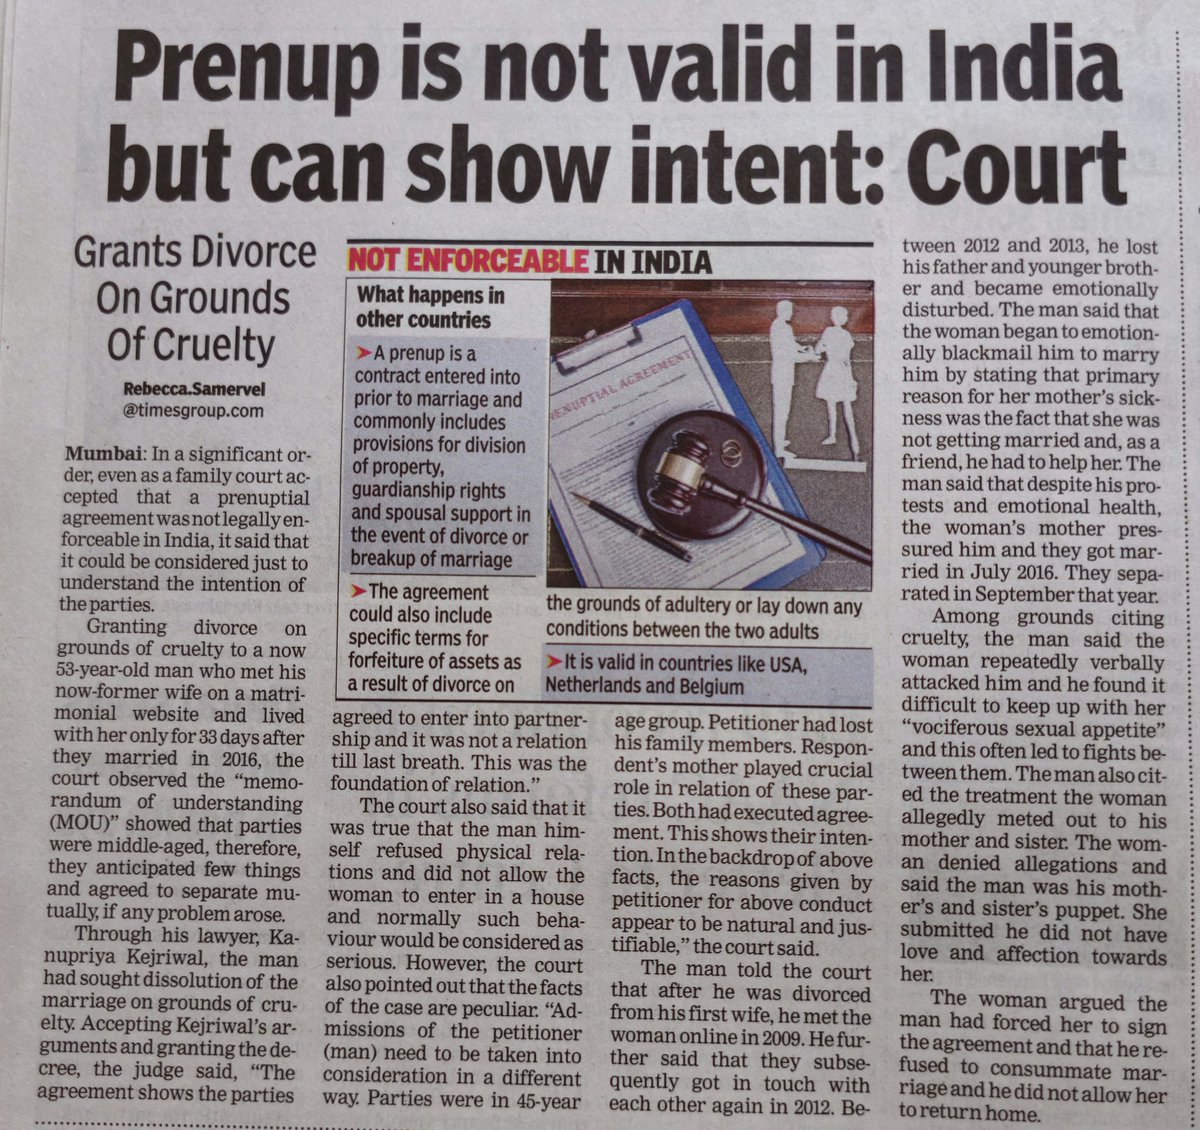 Why Prenup is not valid in India?
Because it will hurt #Feminists mindset?

Our Judiciary should have a study tour to Western countries...

#MarriageStrike
#BoycottMarriage
@realsiff